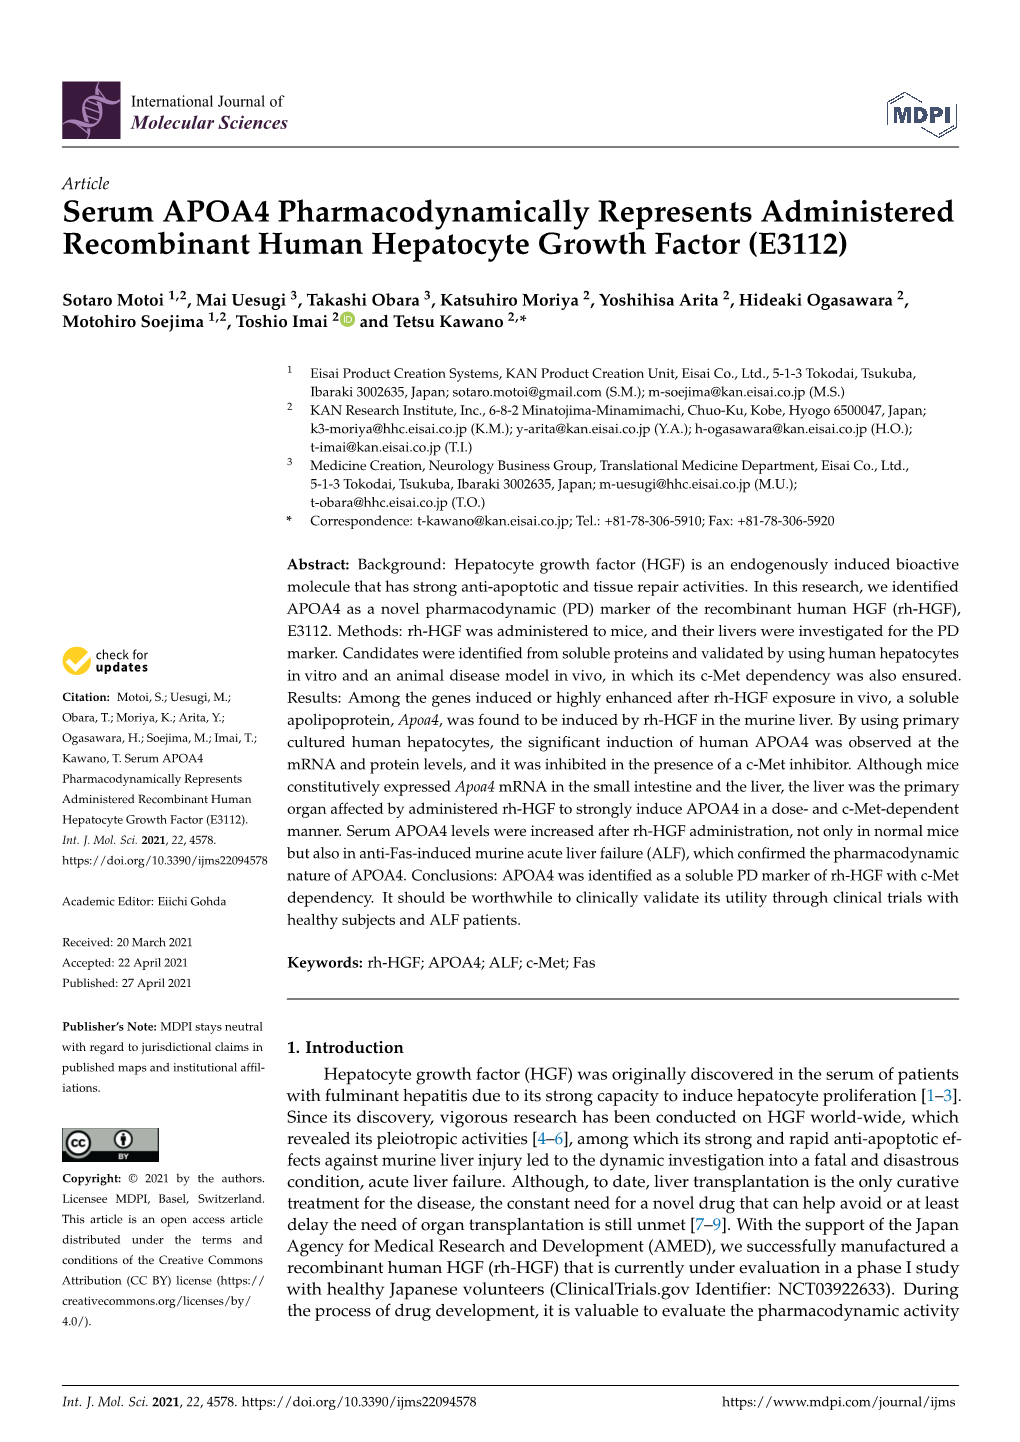 Serum APOA4 Pharmacodynamically Represents Administered Recombinant Human Hepatocyte Growth Factor (E3112)